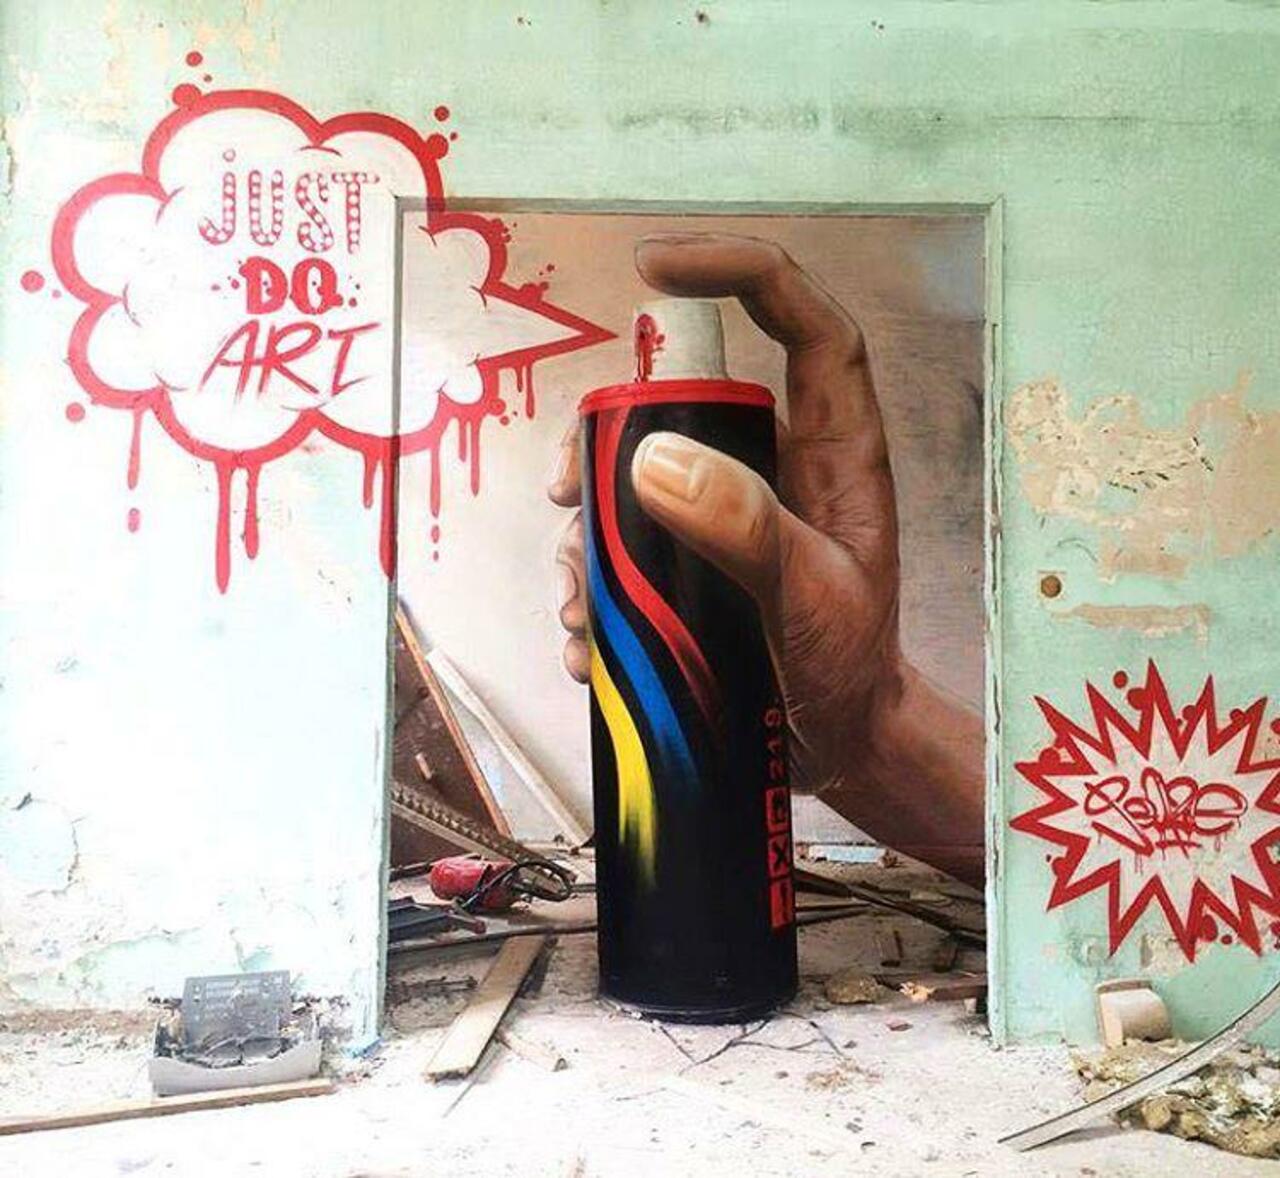 'Just Do Art' a brilliant new installation from Jeaze Oner in France. #StreetArt #Graffiti #Mural http://t.co/MRA4nXqDiD